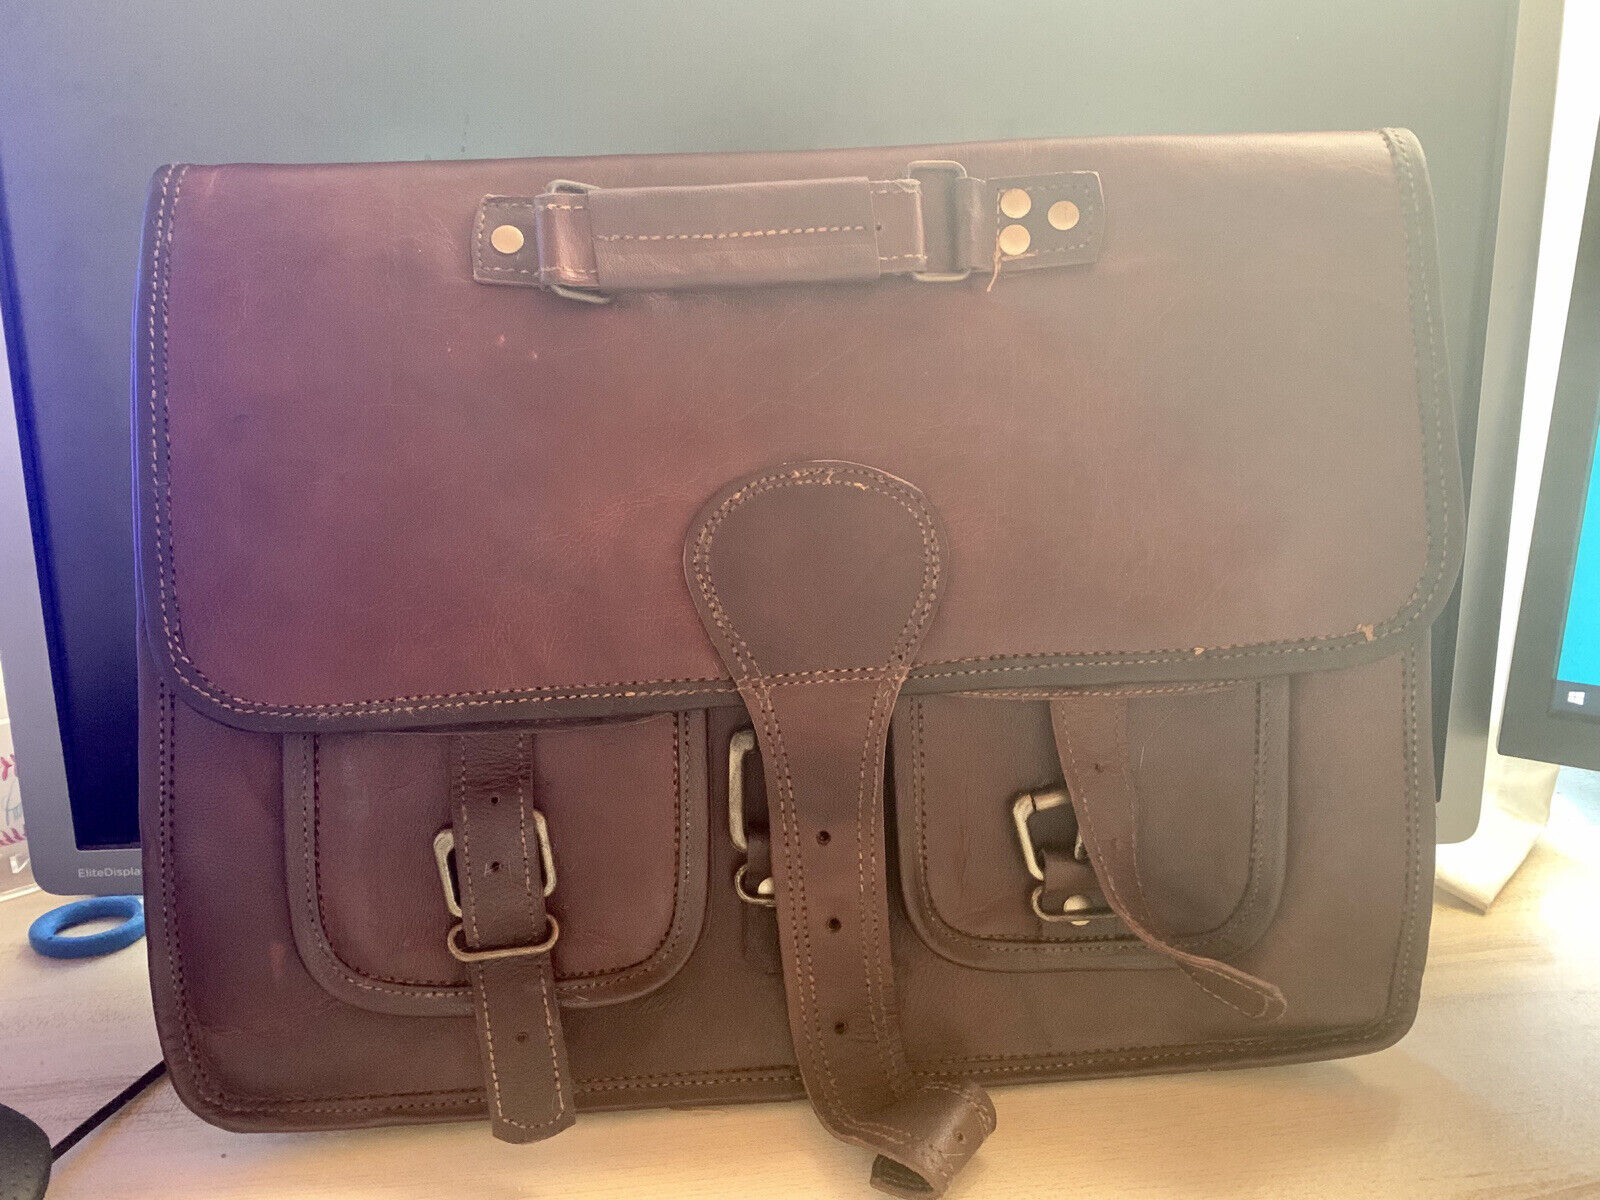 15” Vintage Style Leather Laptop Bag - Brand New, Never Used